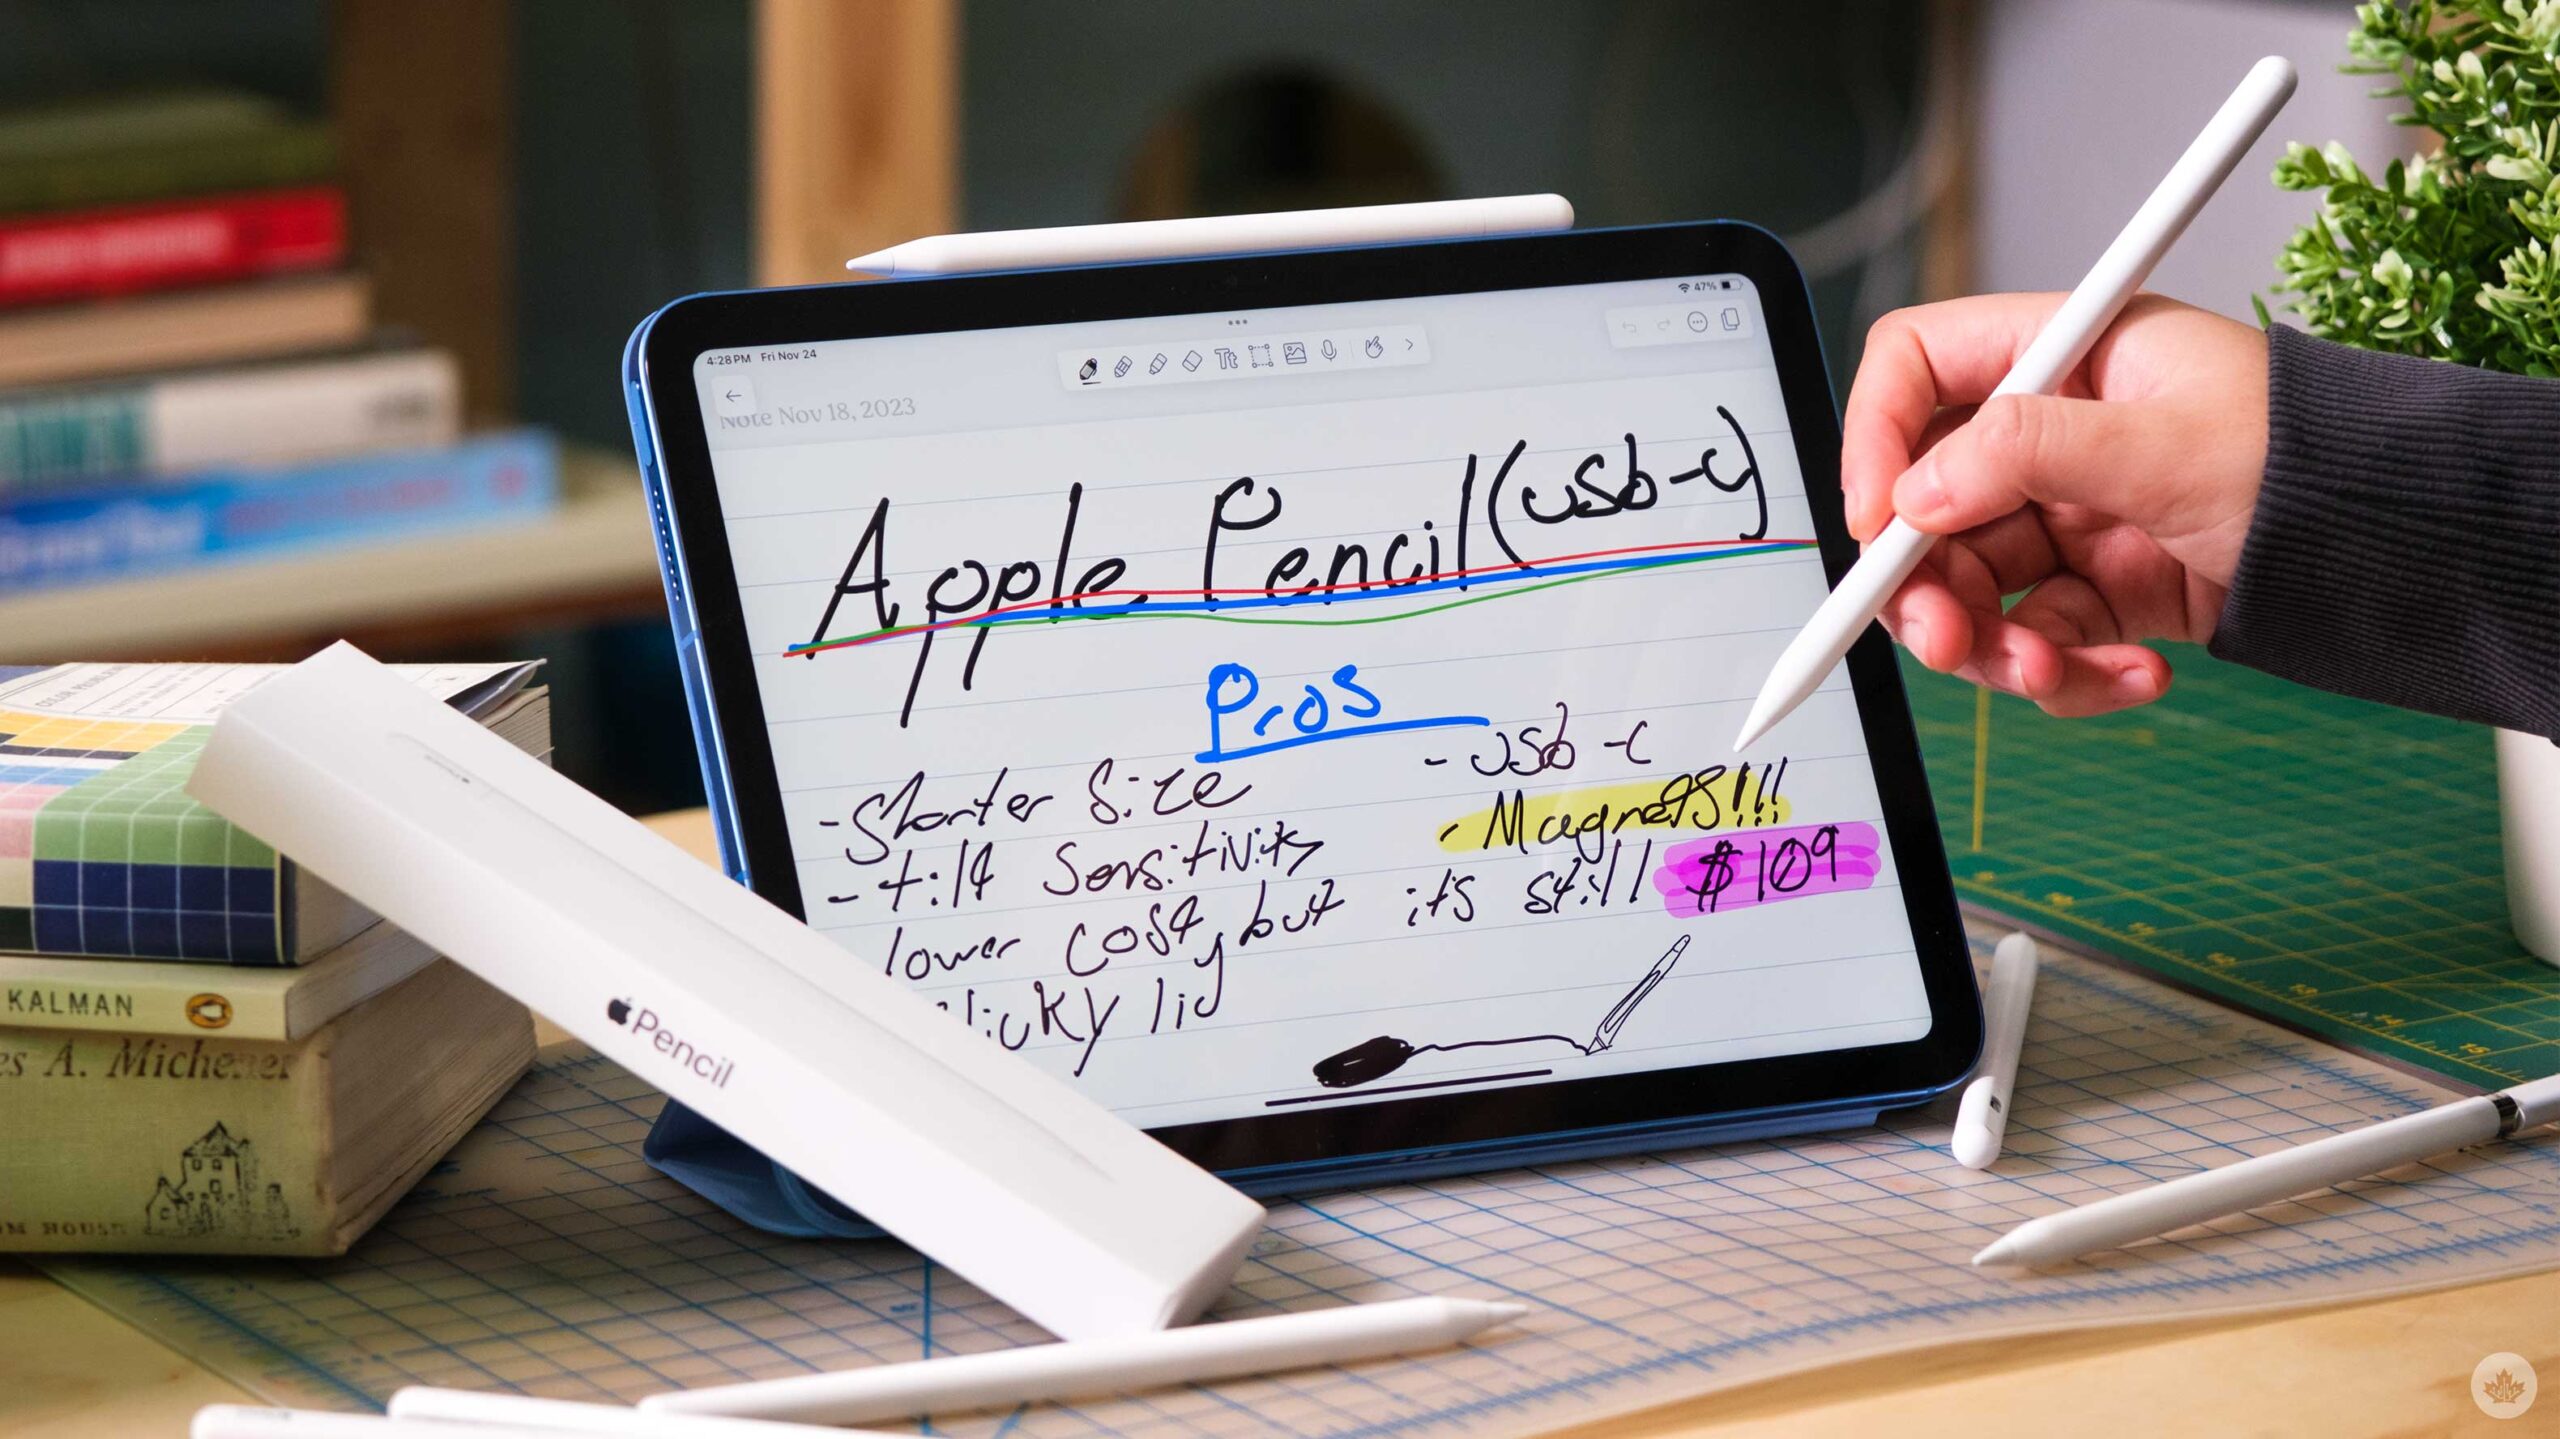 The USB-C Apple Pencil offers a lower price point, but is it low